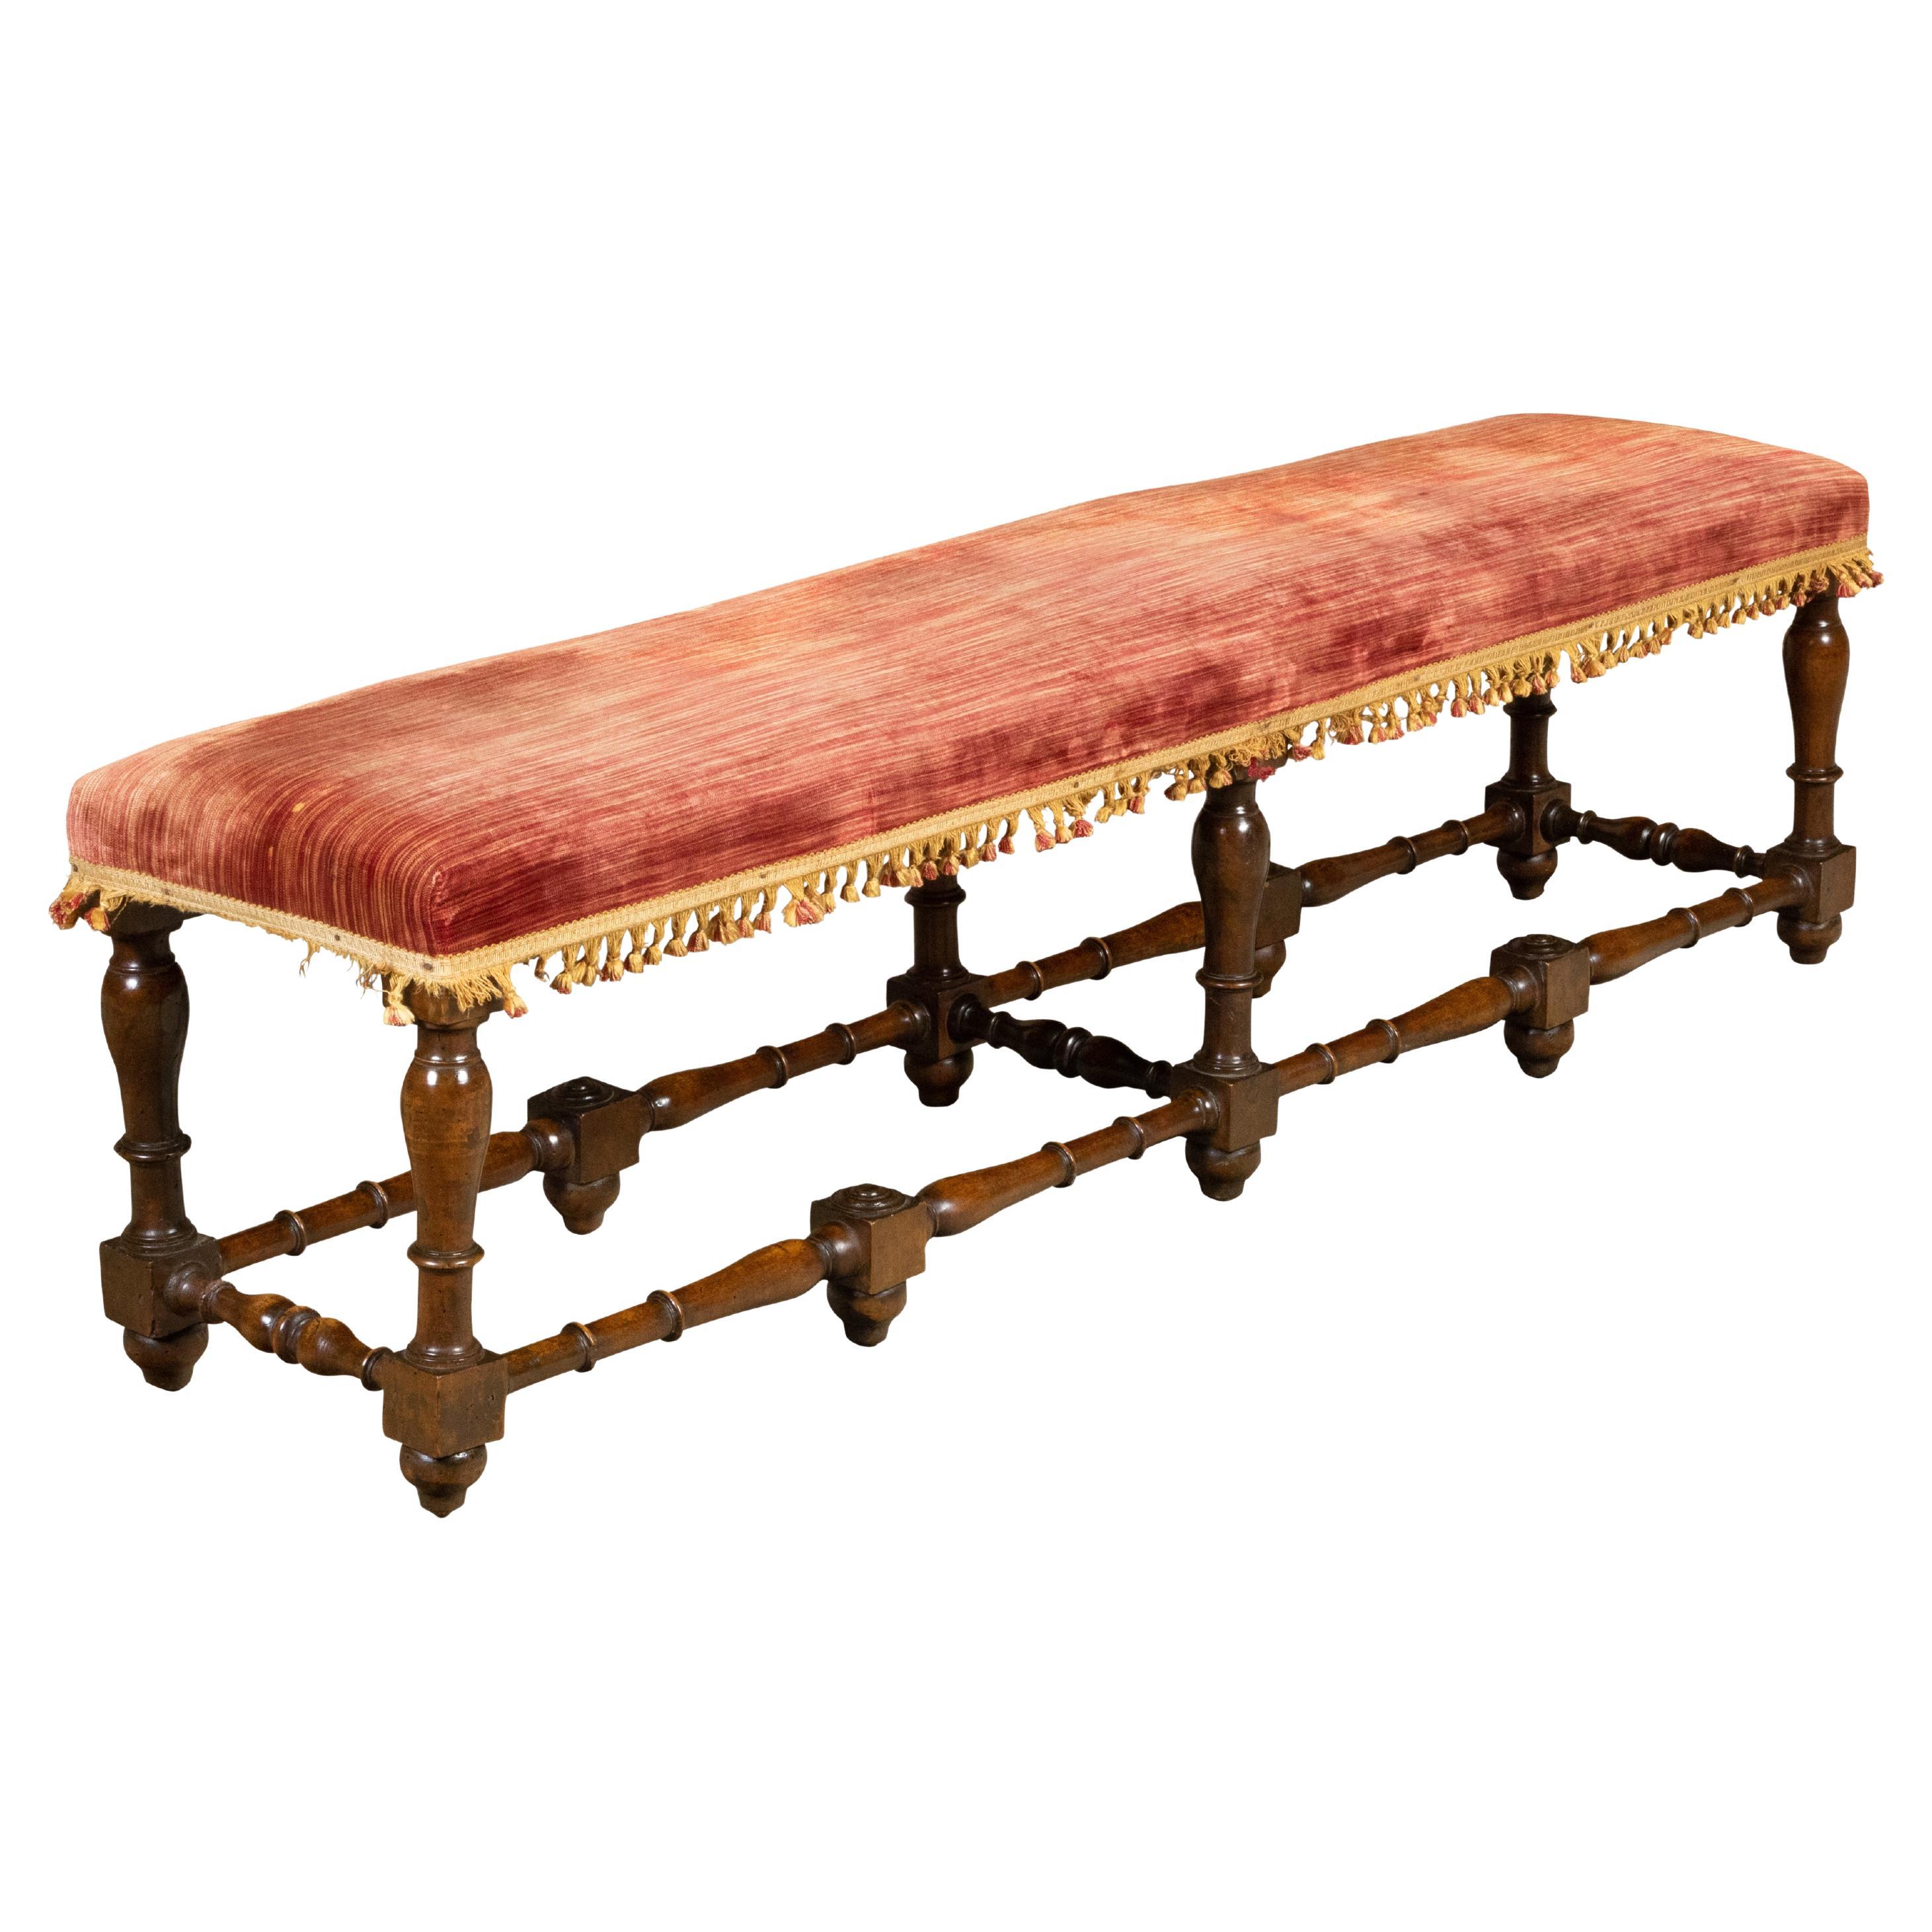 Italian 1820s Walnut Bench with Red Fabric, Turned Legs and Stretchers